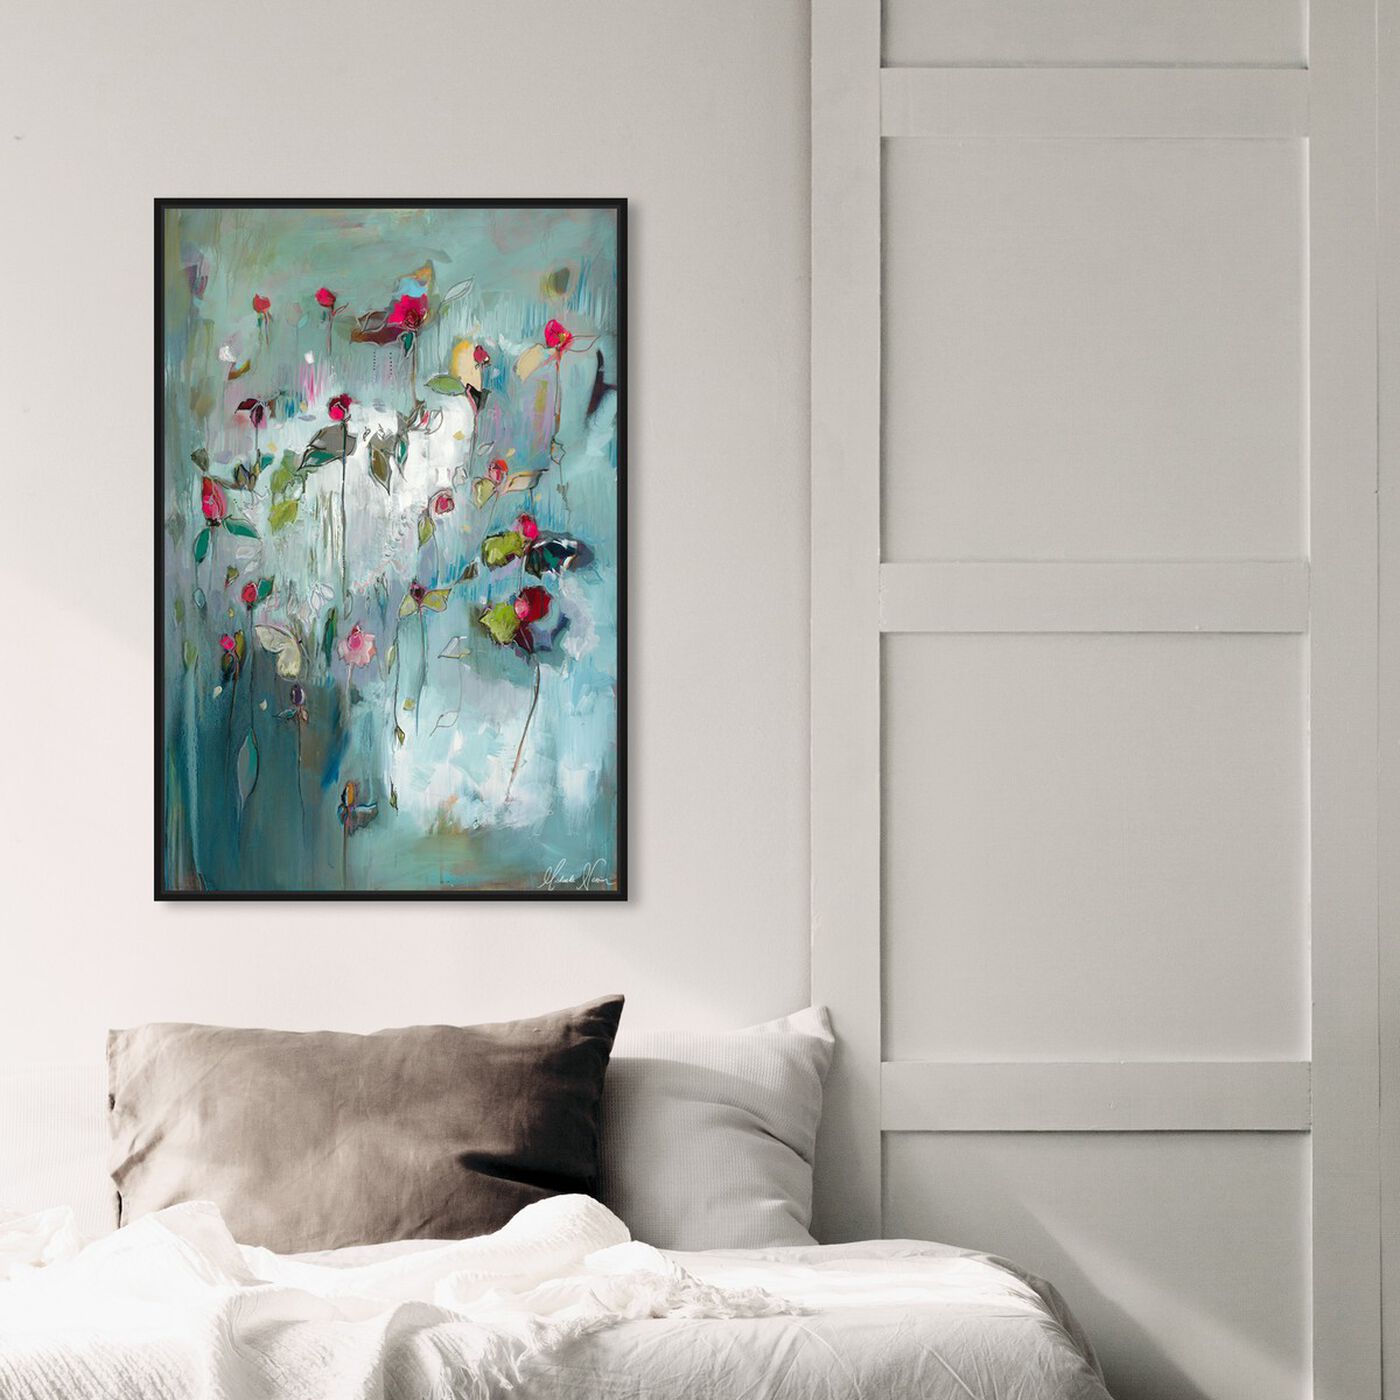 Hanging view of pale blue influence 1 by Michaela Nessim featuring abstract and paint art.